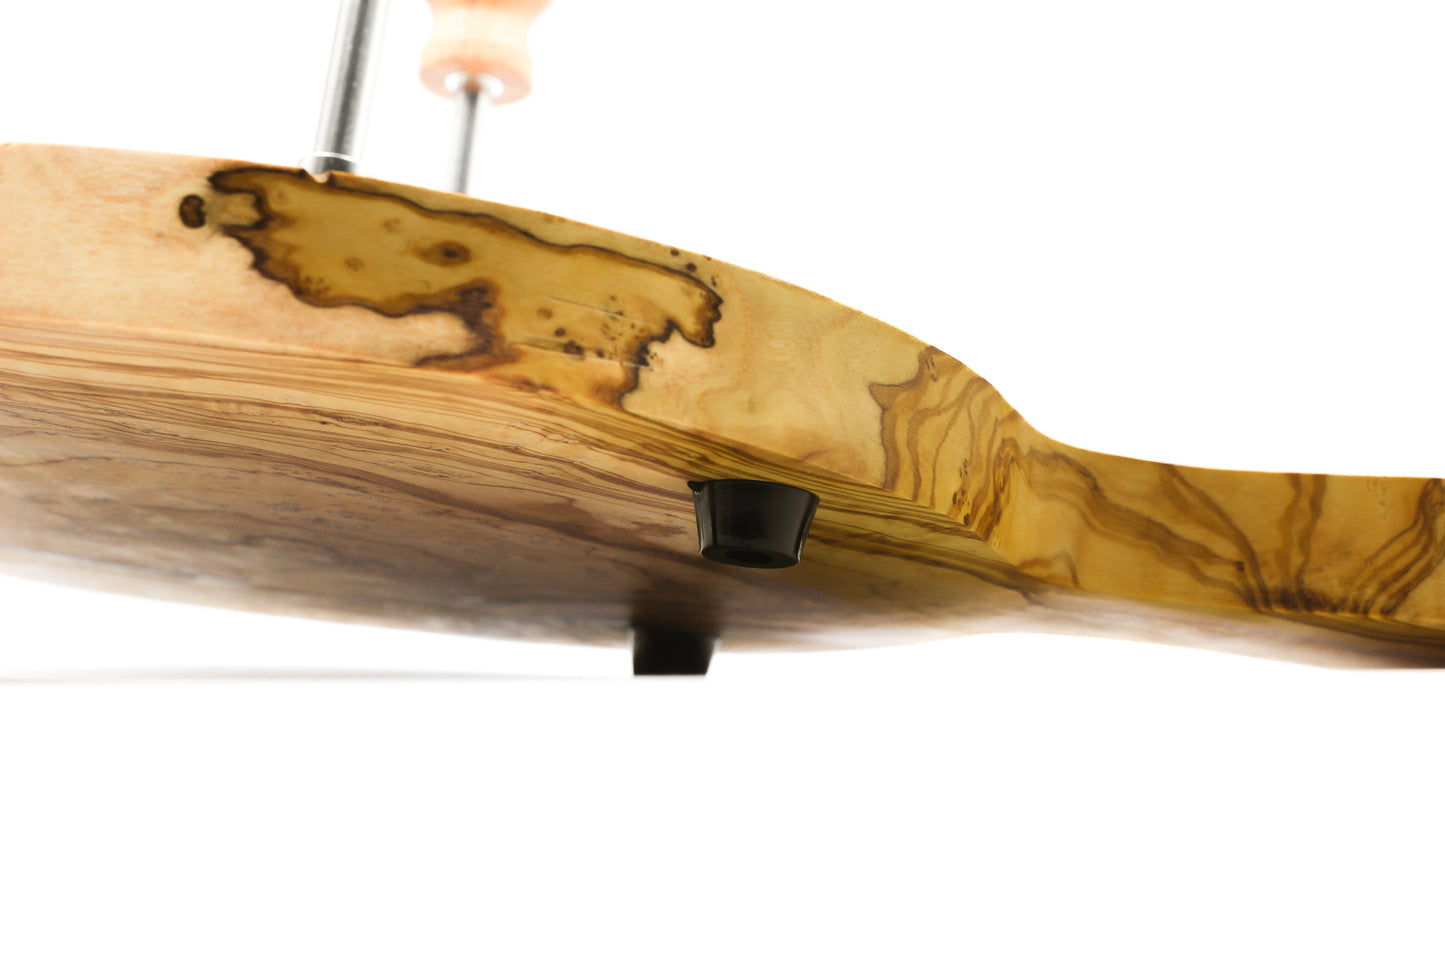 Eco-friendly cheese serving set made from olive wood, including a stainless steel platter and cheese shaver